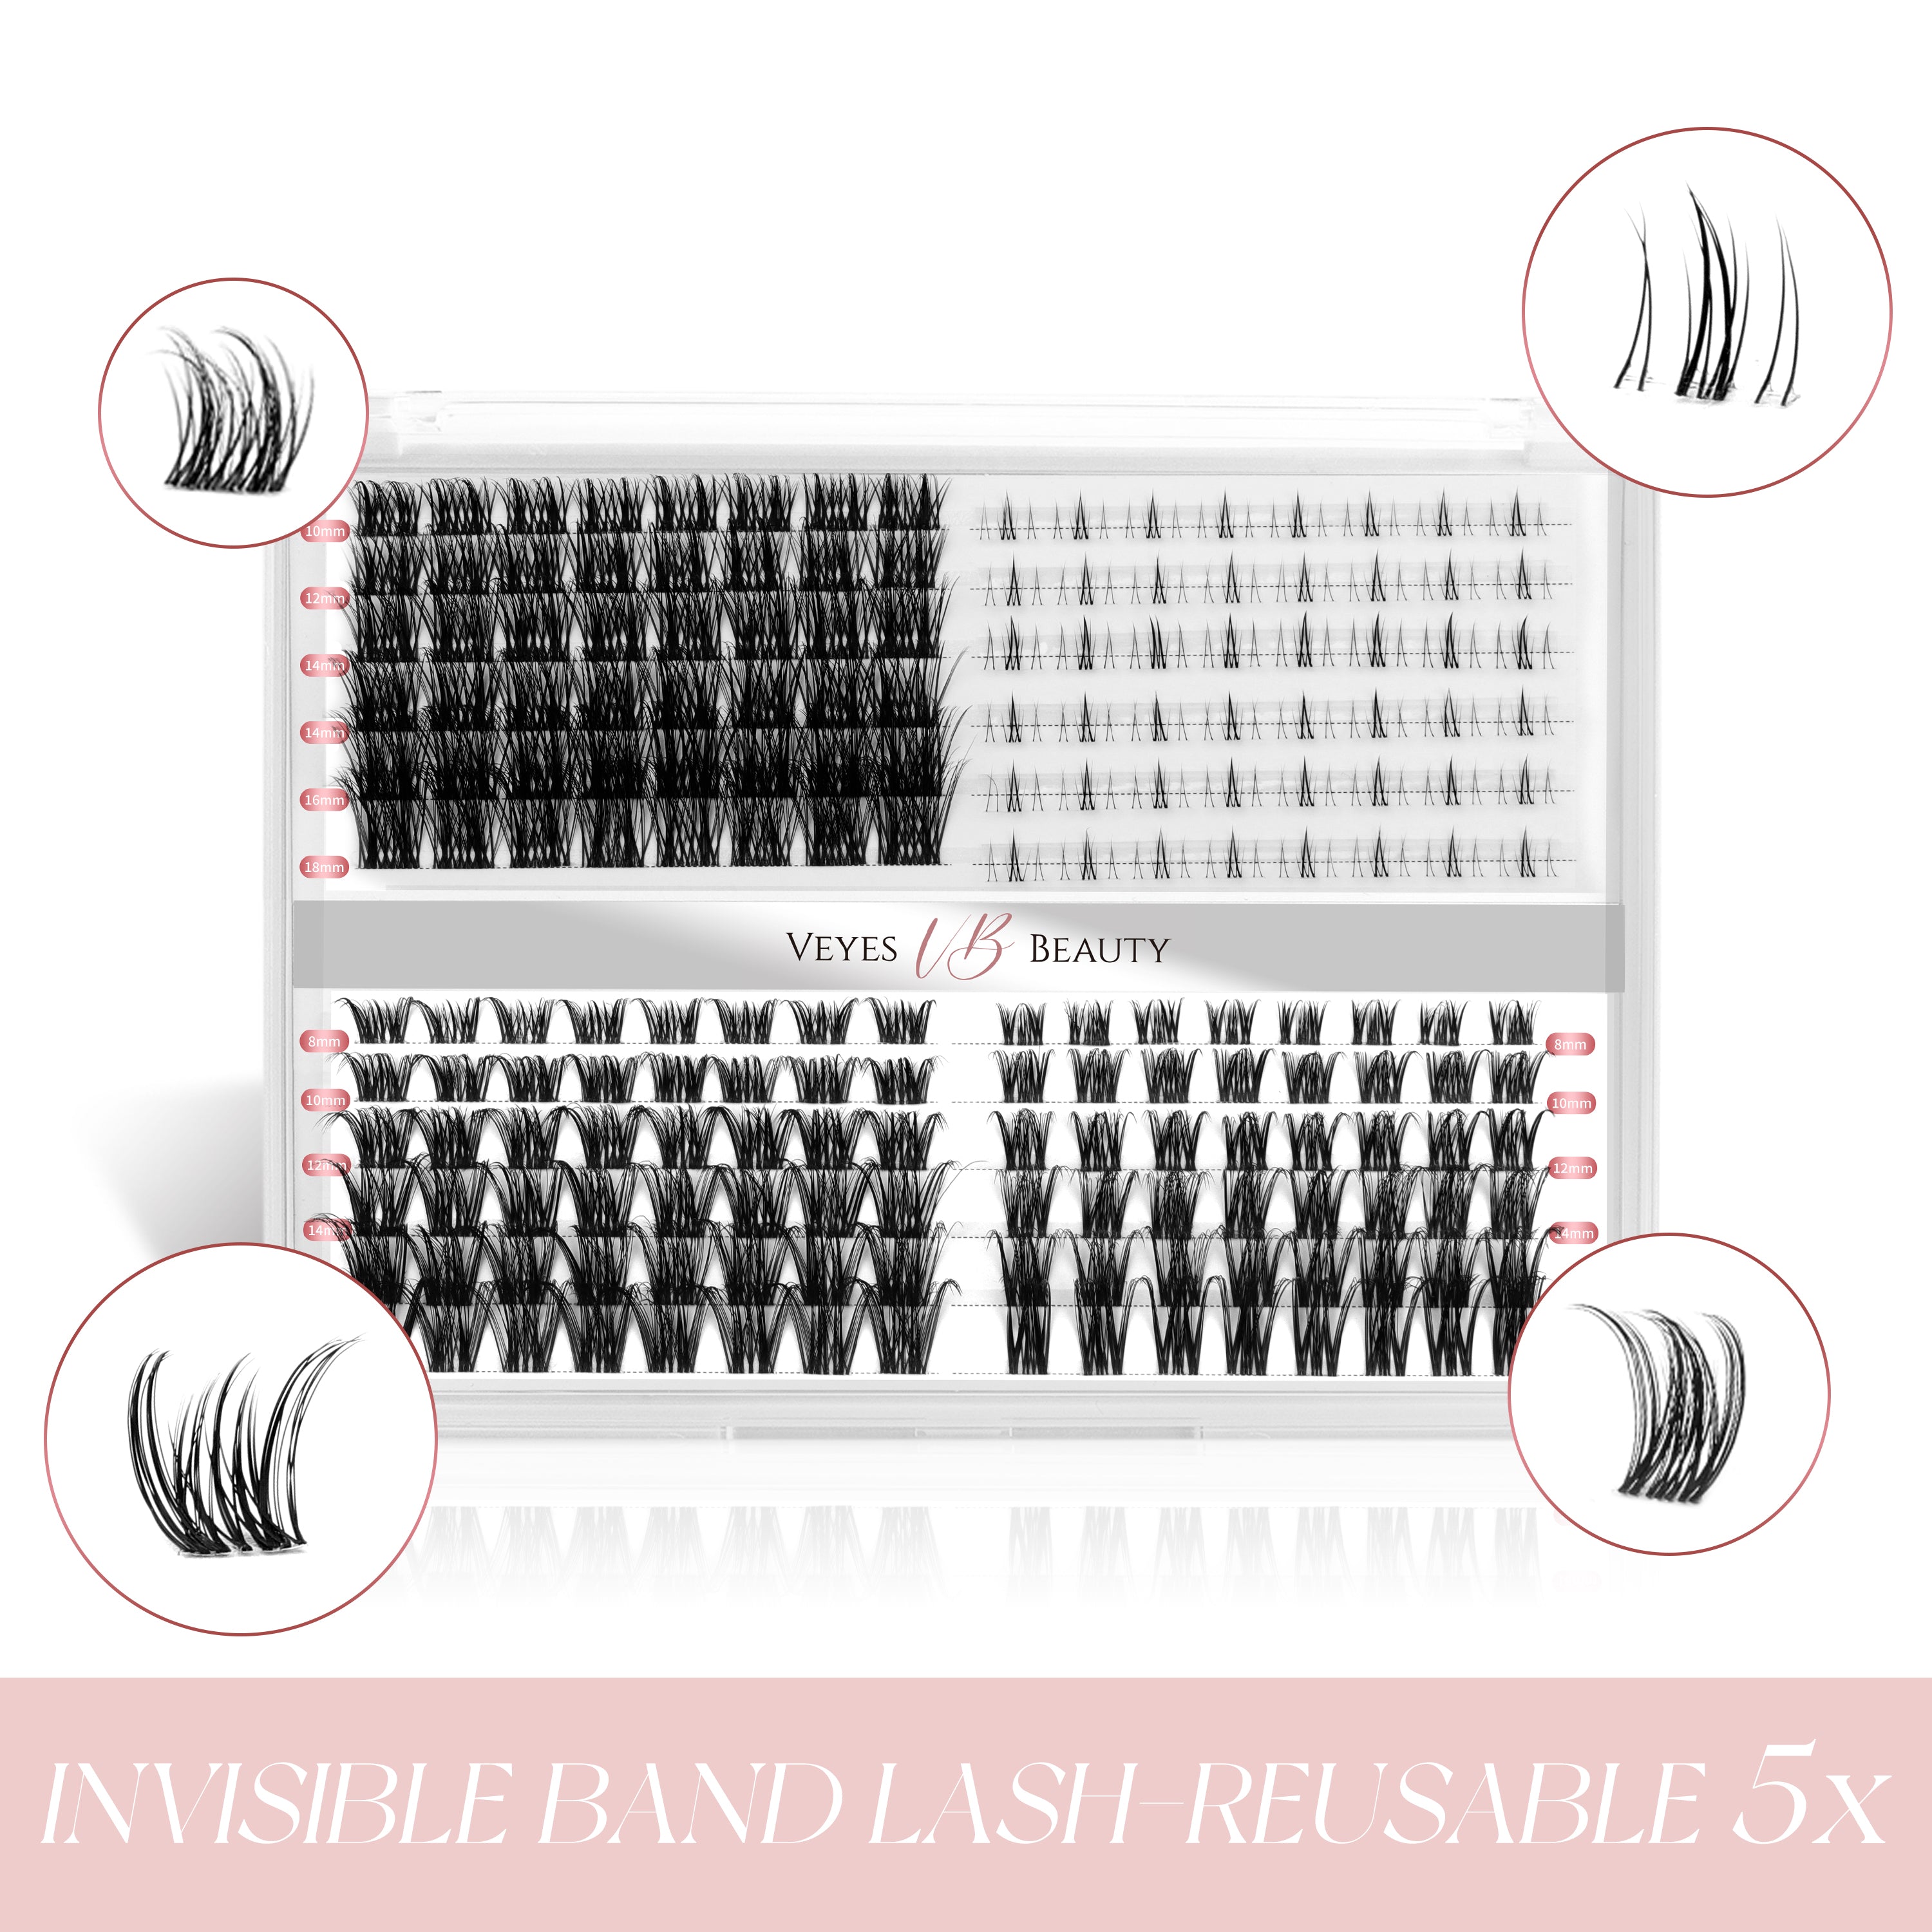 ALL-IN-ONE Lash Clusters | Invisible Band™ Lashes